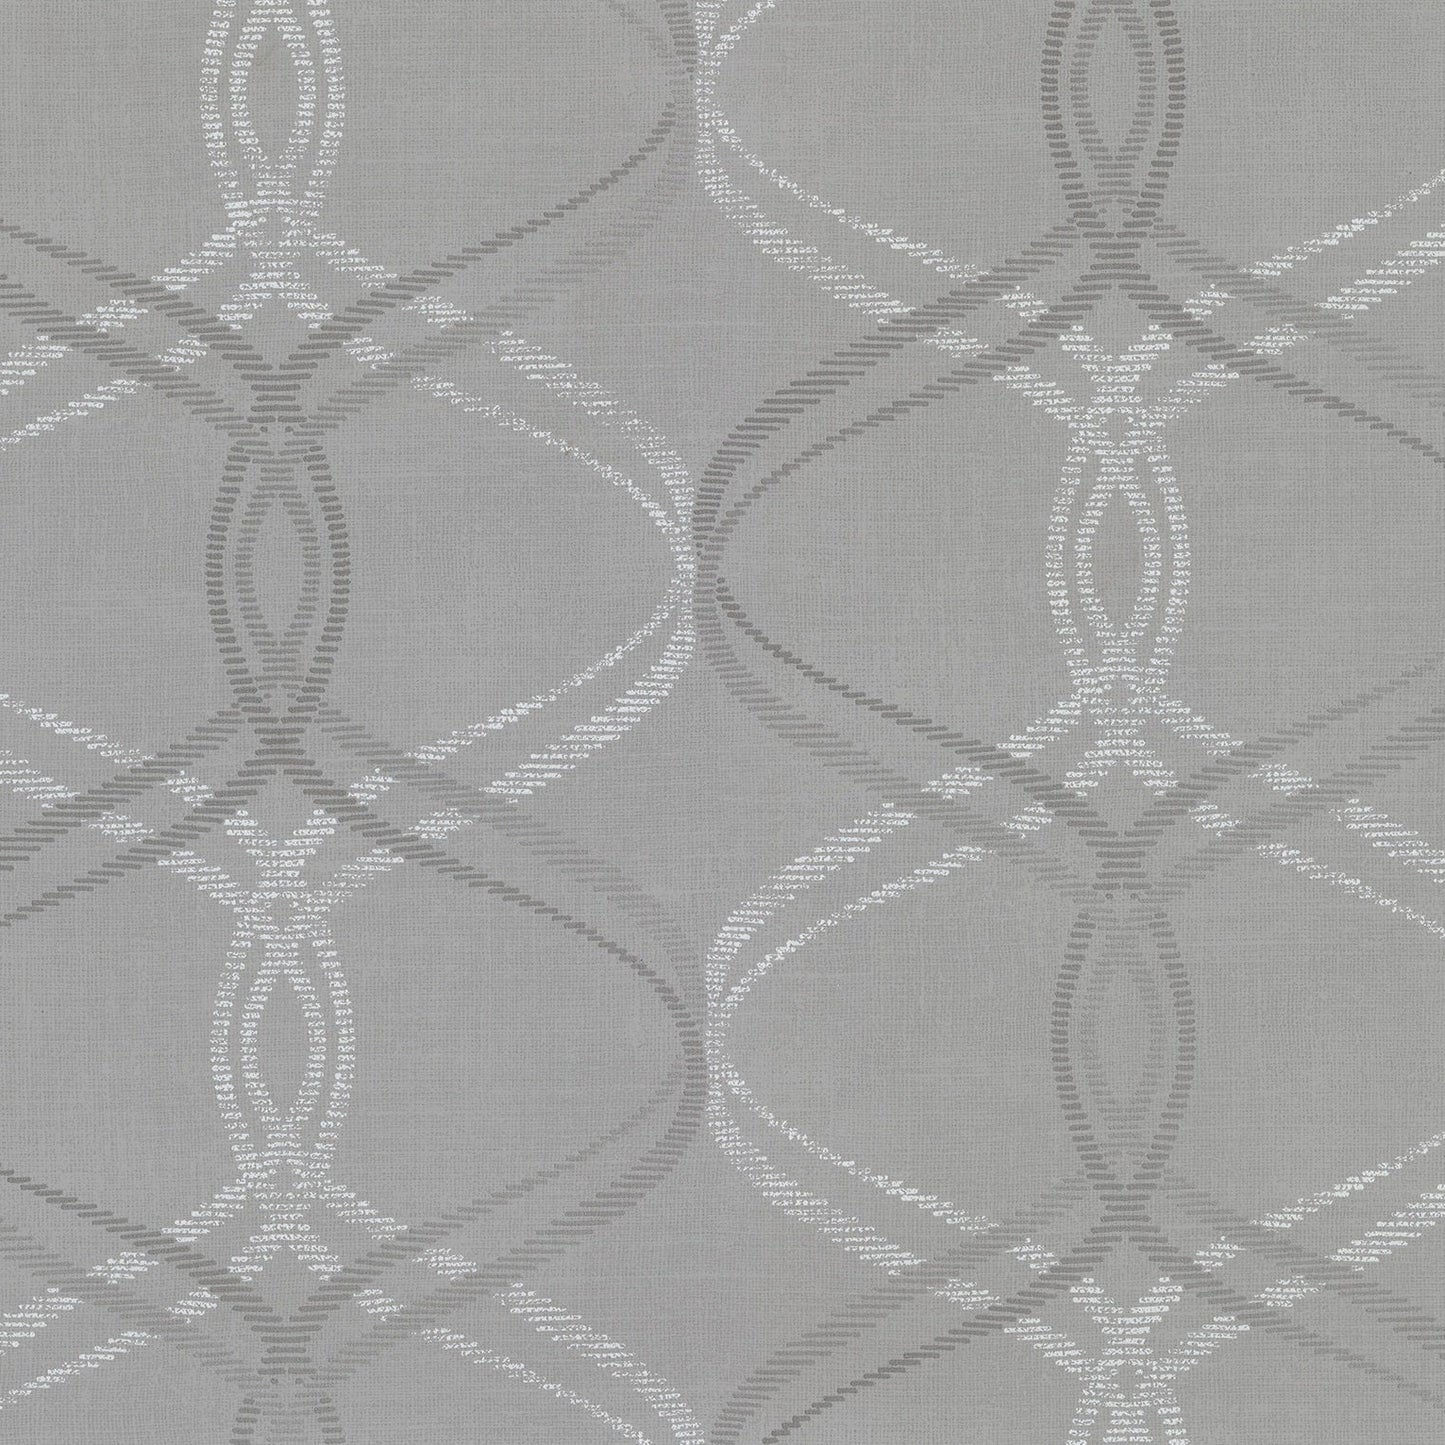 Buy 2836-801644 Shades of Grey Greys Ogee Wallpaper by Advantage